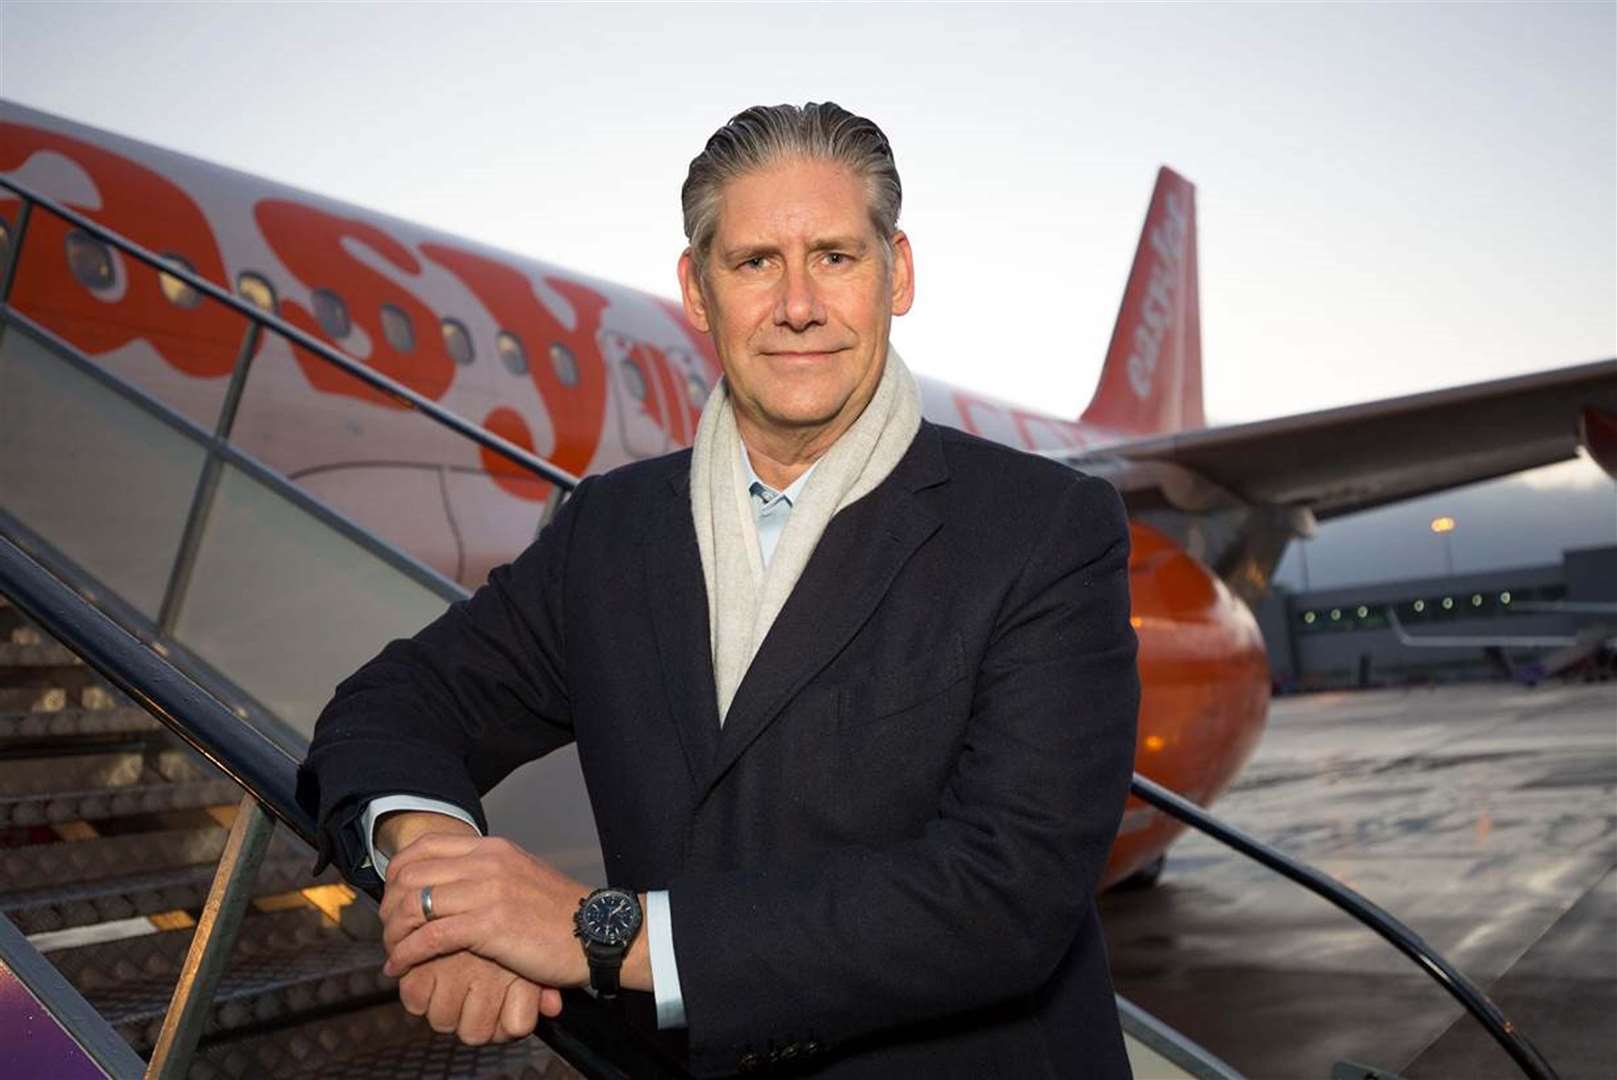 EasyJet boss Johan Lundgren said: ‘We are taking pre-emptive actions to increase resilience over the balance of summer’ (EasyJet/PA)